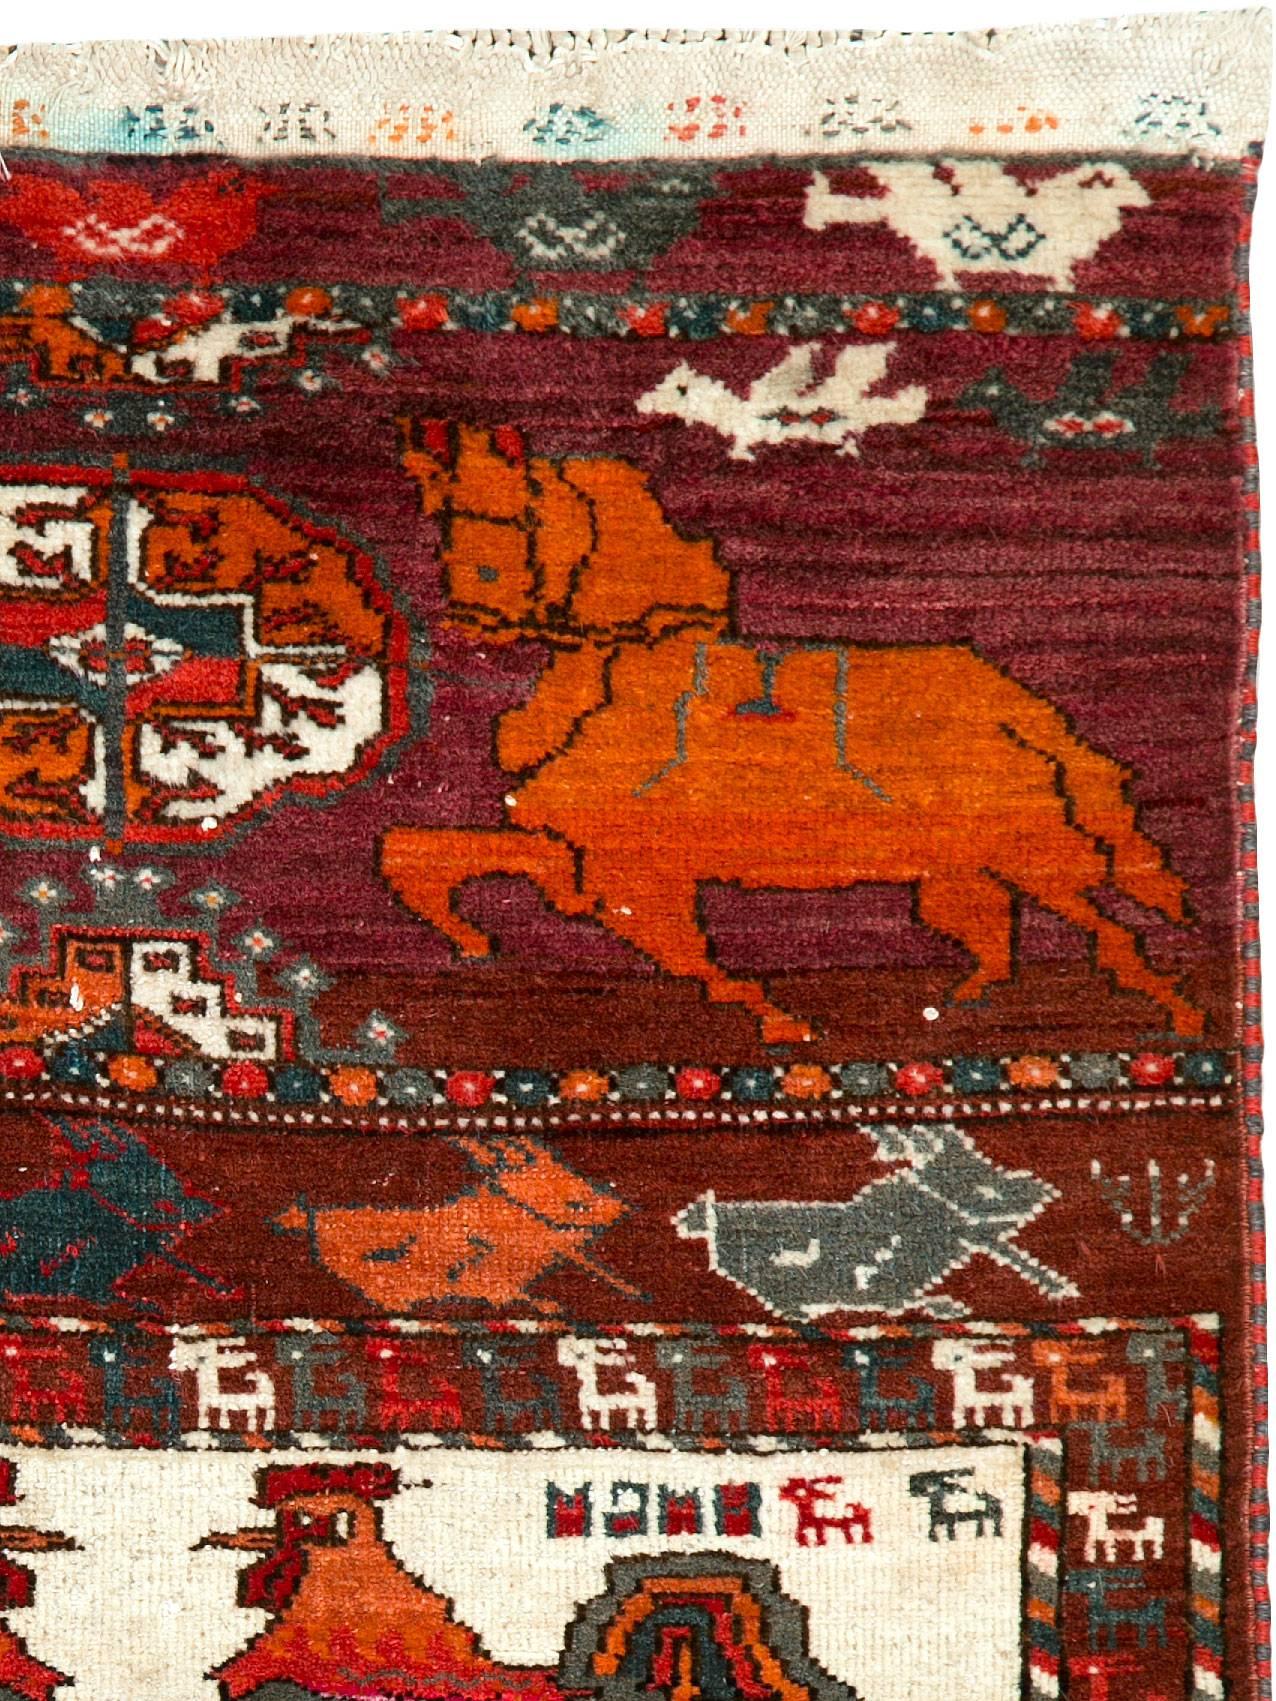 A vintage Persian Turkoman (Turkmen) carpet from the third quarter of the 20th century with a pictorial design.